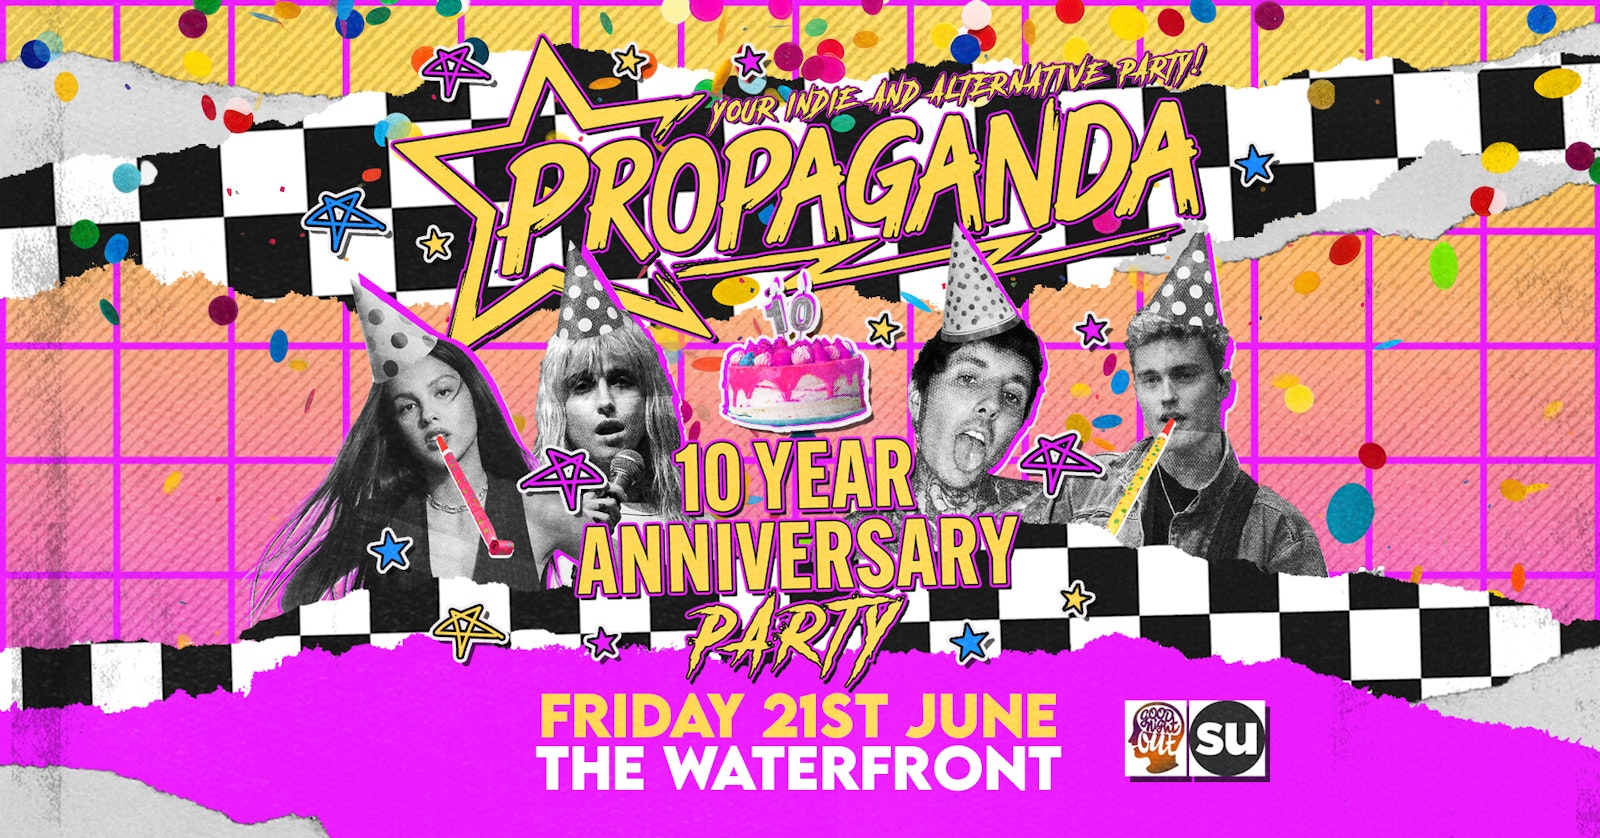 Propaganda Norwich 10 Year Anniversary at The Waterfront Party!